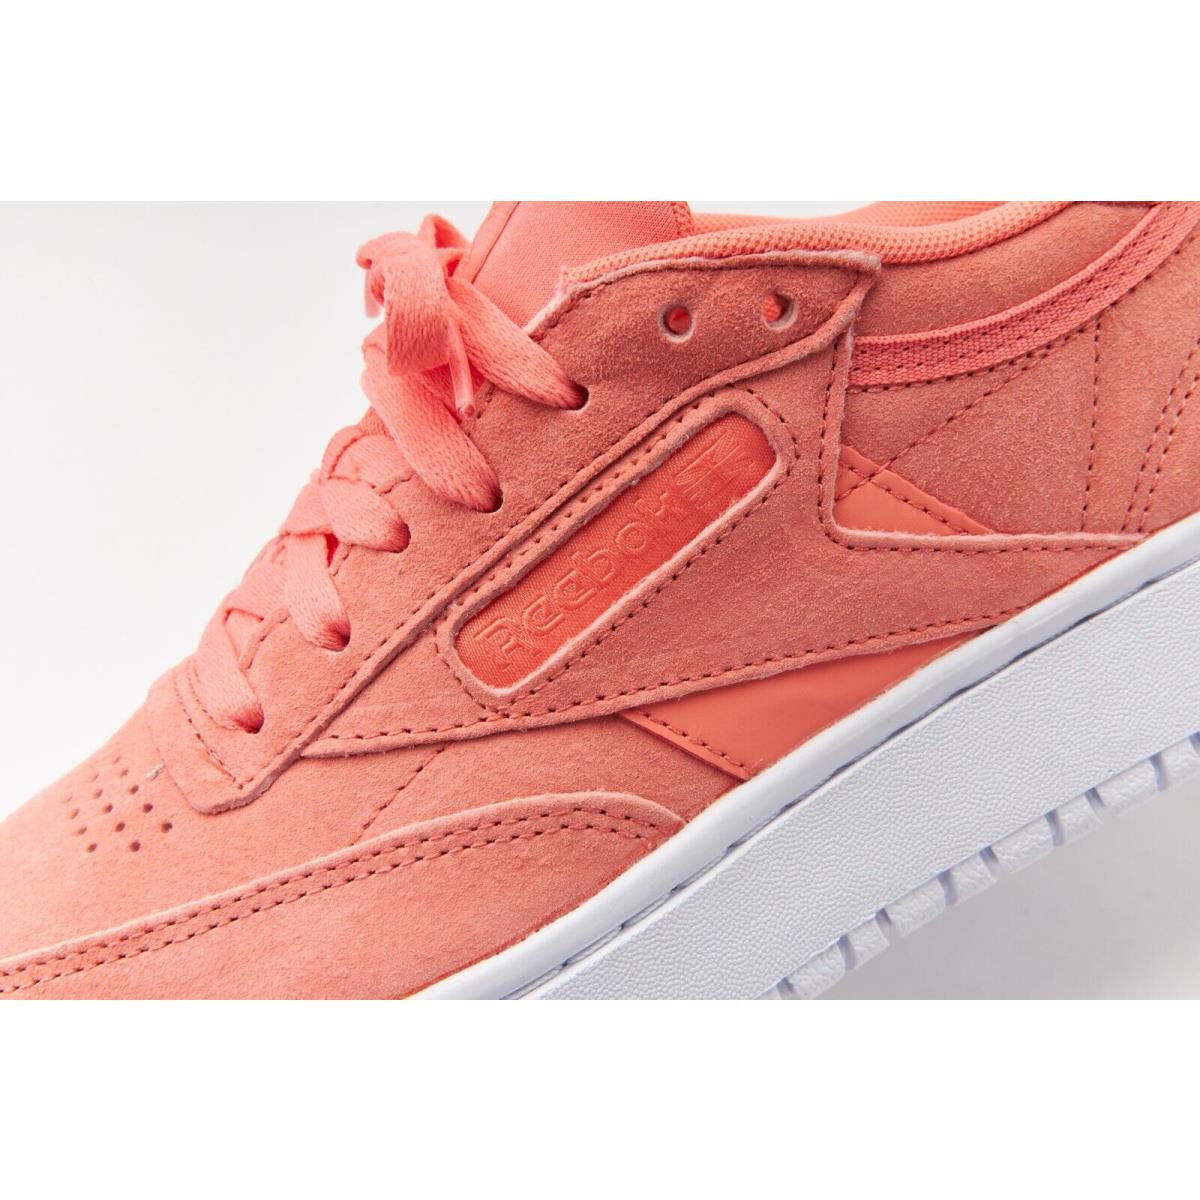 Reebok shoes Club Double - Twisted Coral/White 7